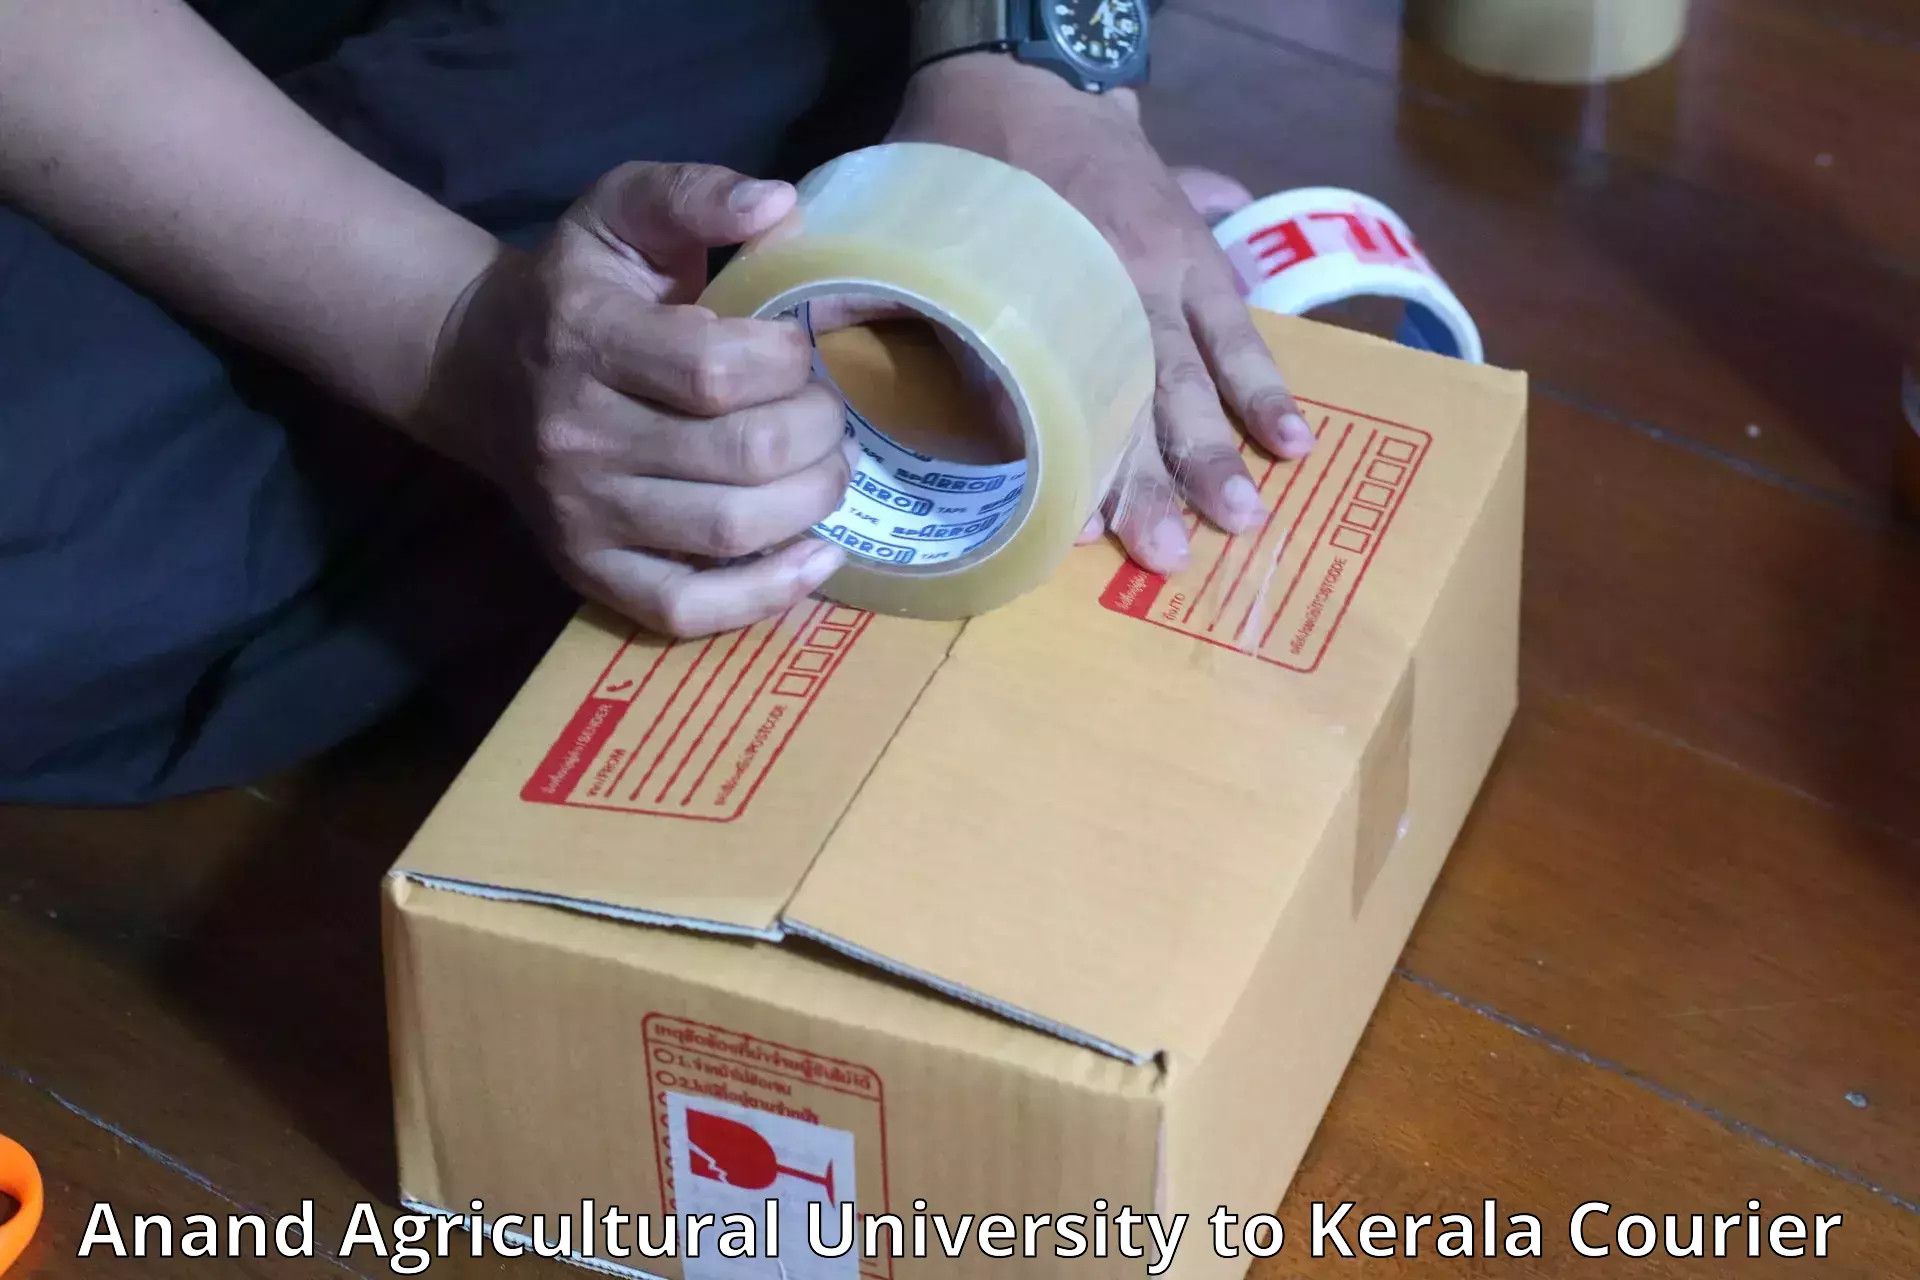 Luggage transport consulting Anand Agricultural University to Kerala